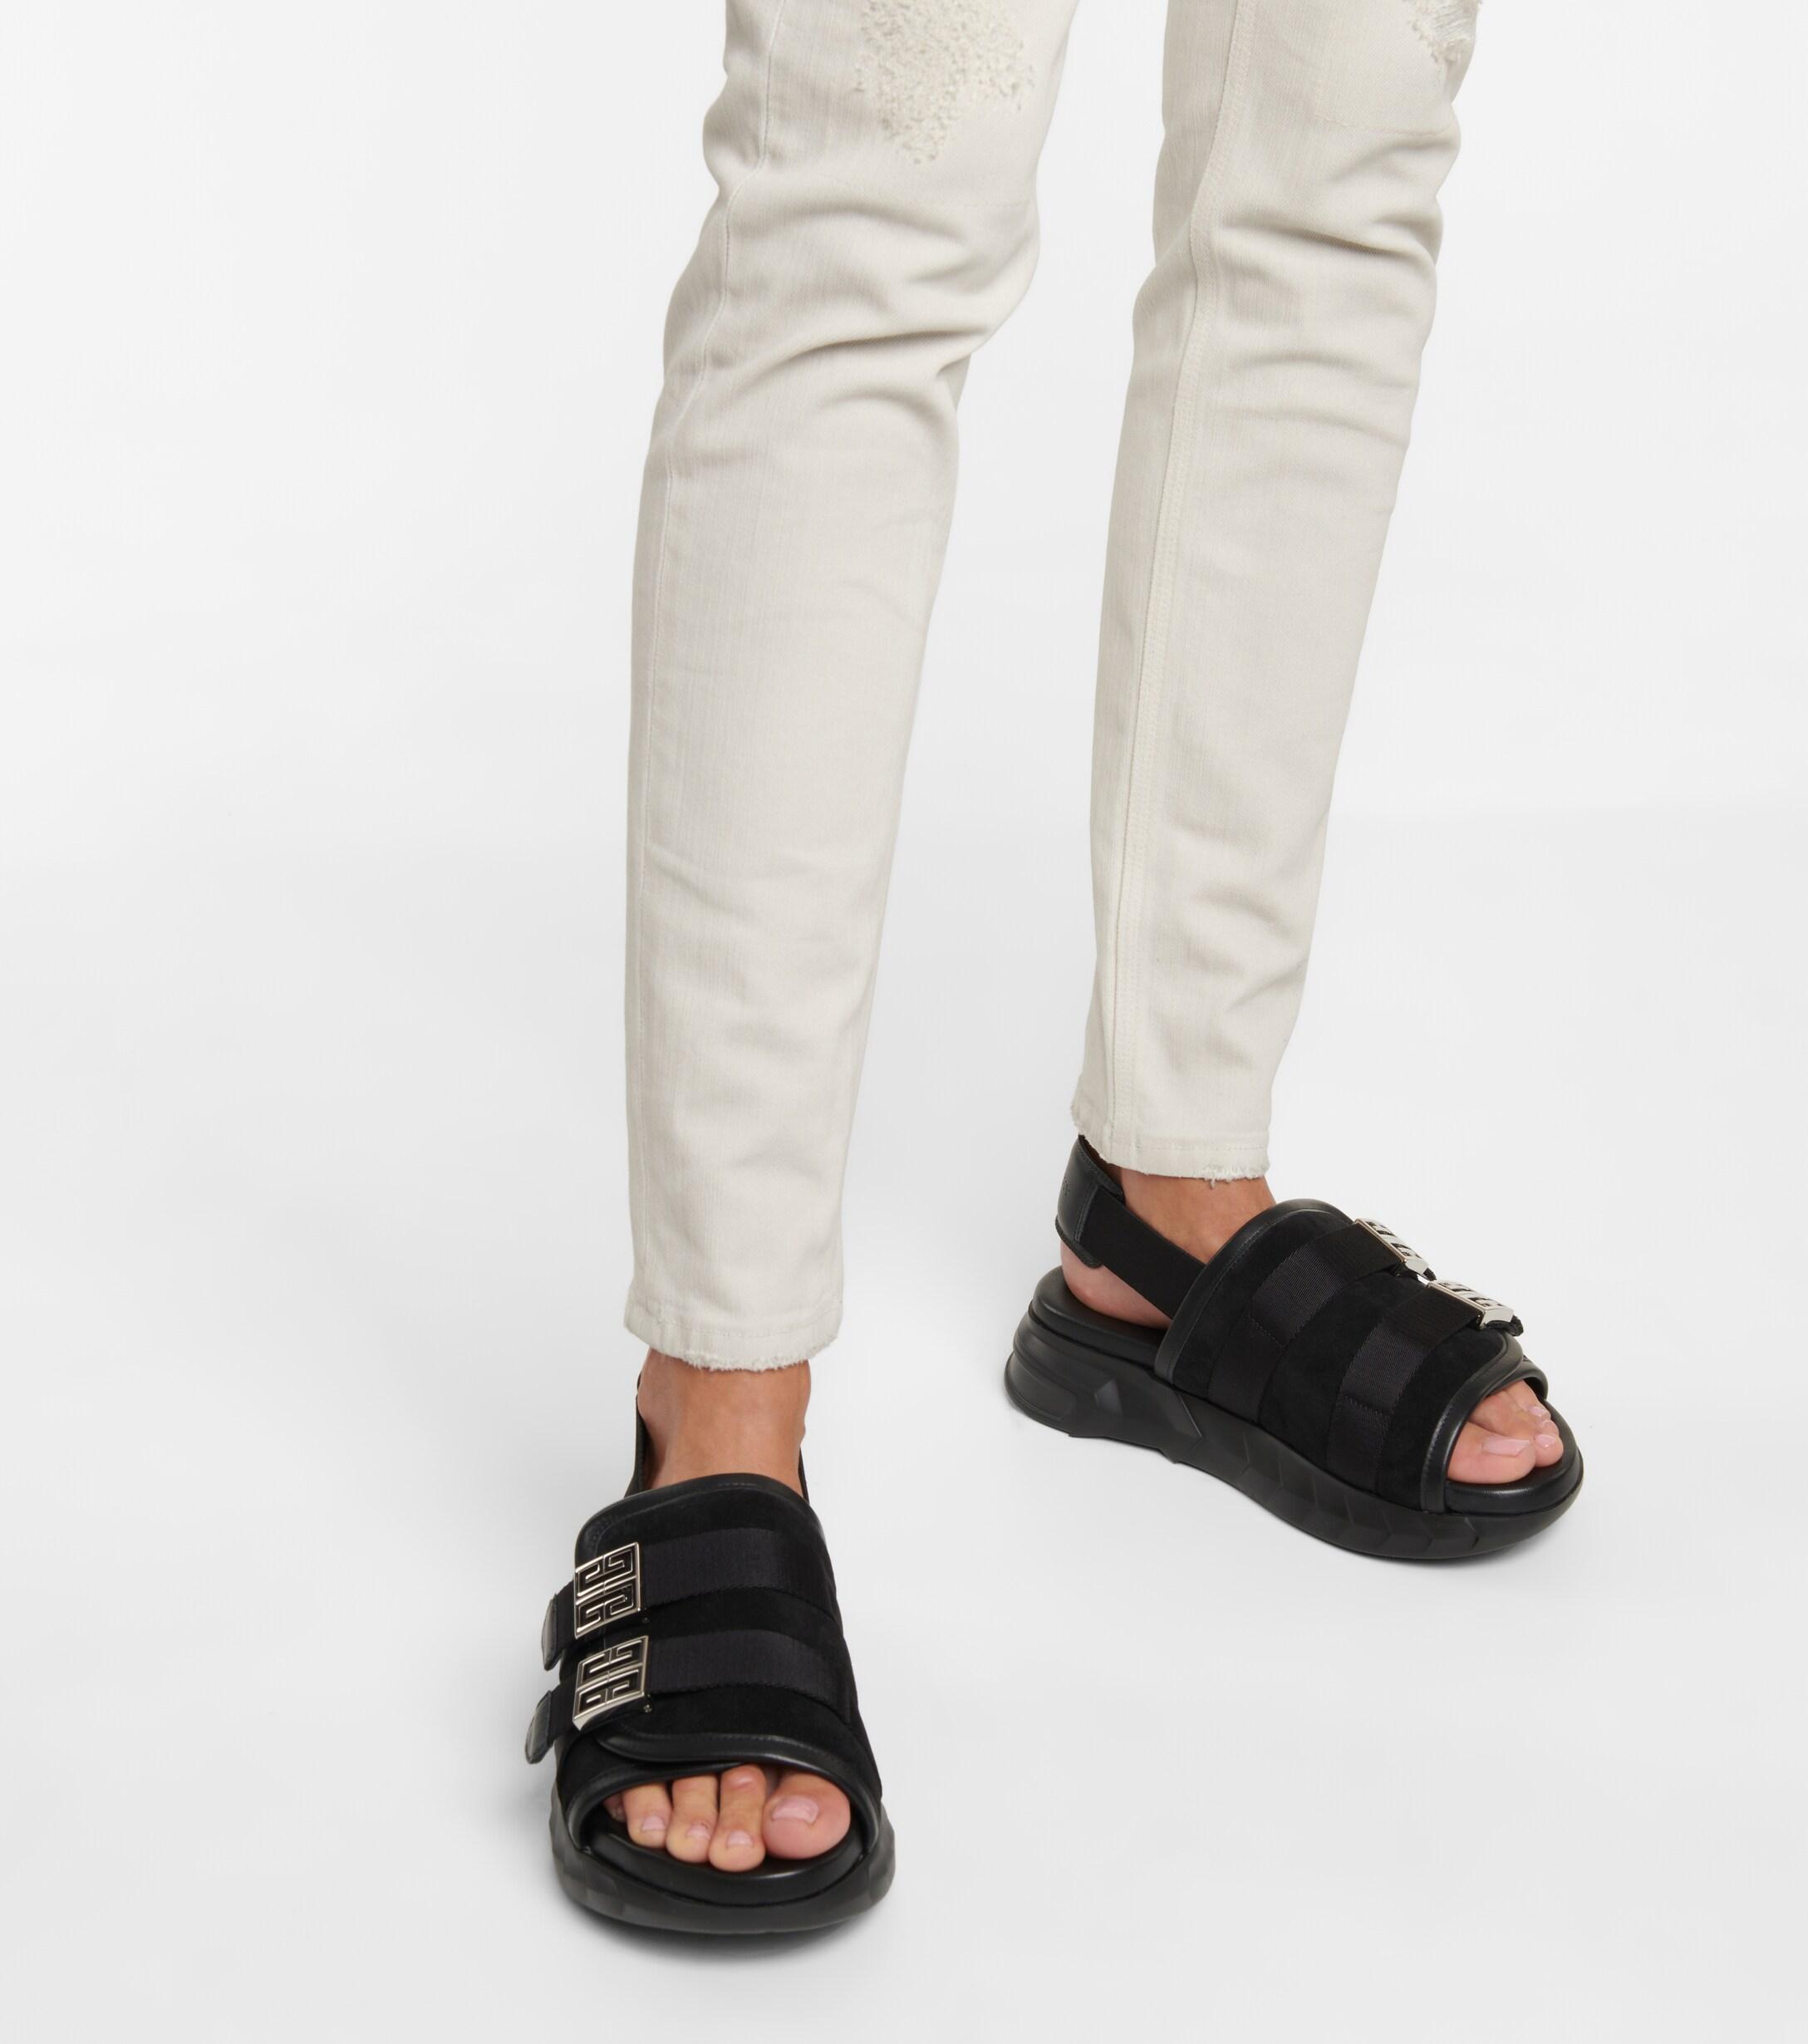 Givenchy Leather Marshmallow Slingback Sandals in Black | Lyst